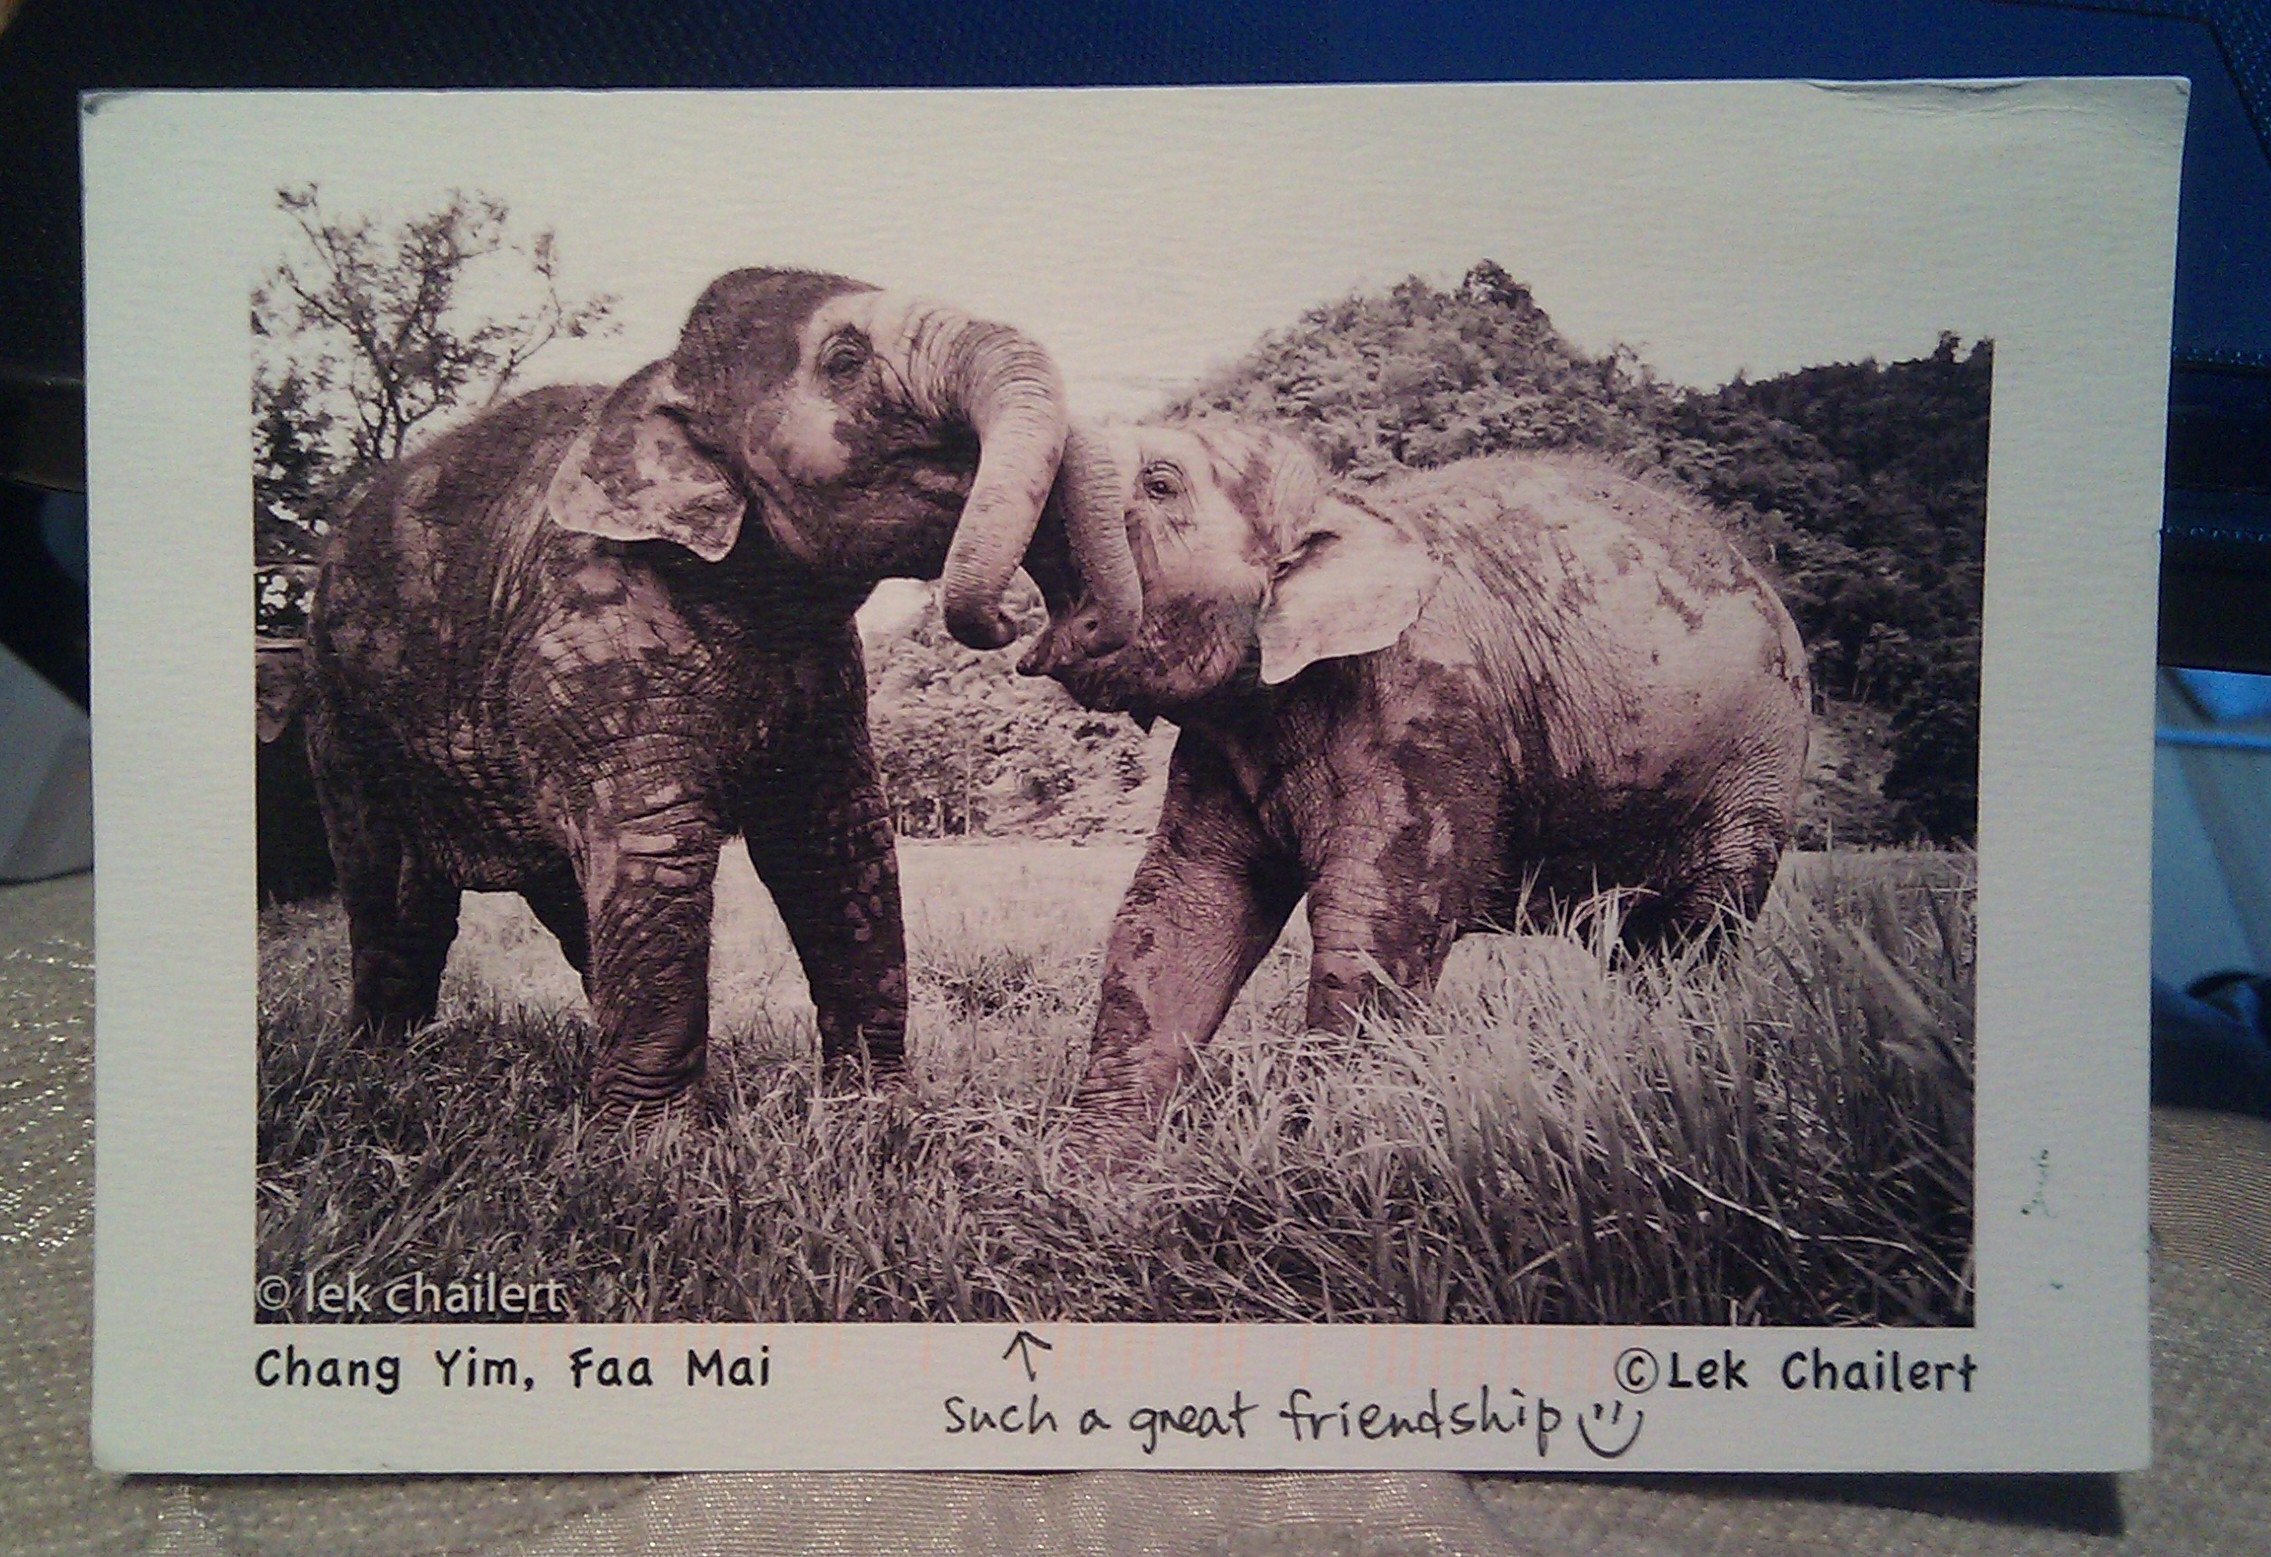 From the Elephant Nature Park, but Lek Chailert